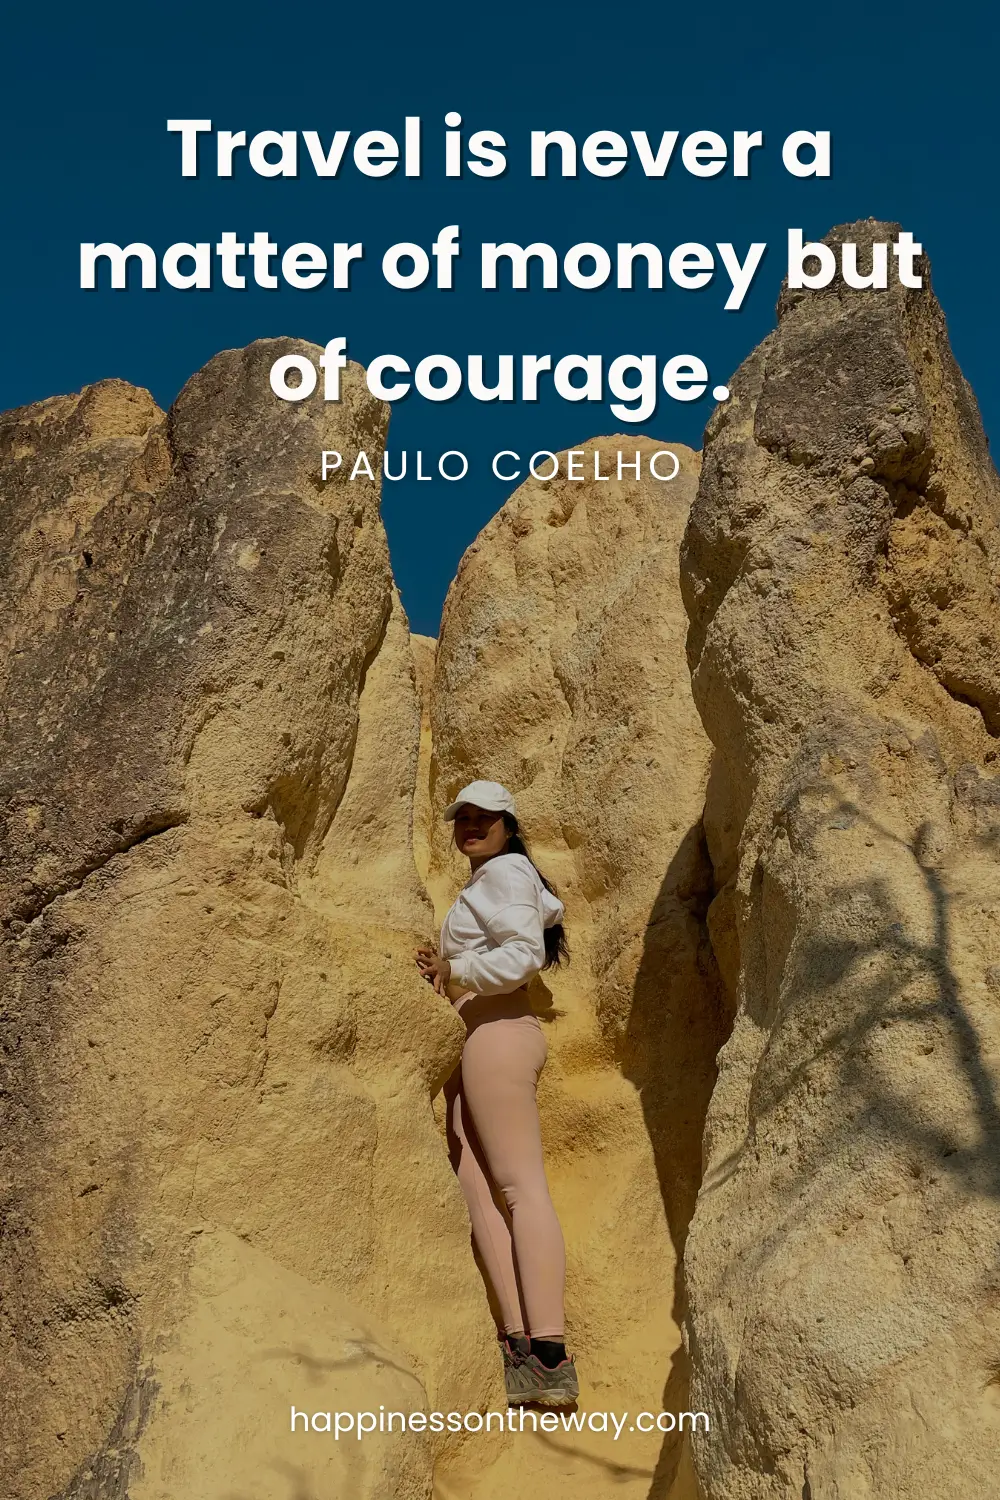 Me poised between rugged rock formations in Pai Canyon under a clear blue sky, accompanied by Paulo Coelho's quote 'Travel is never a matter of money but of courage.